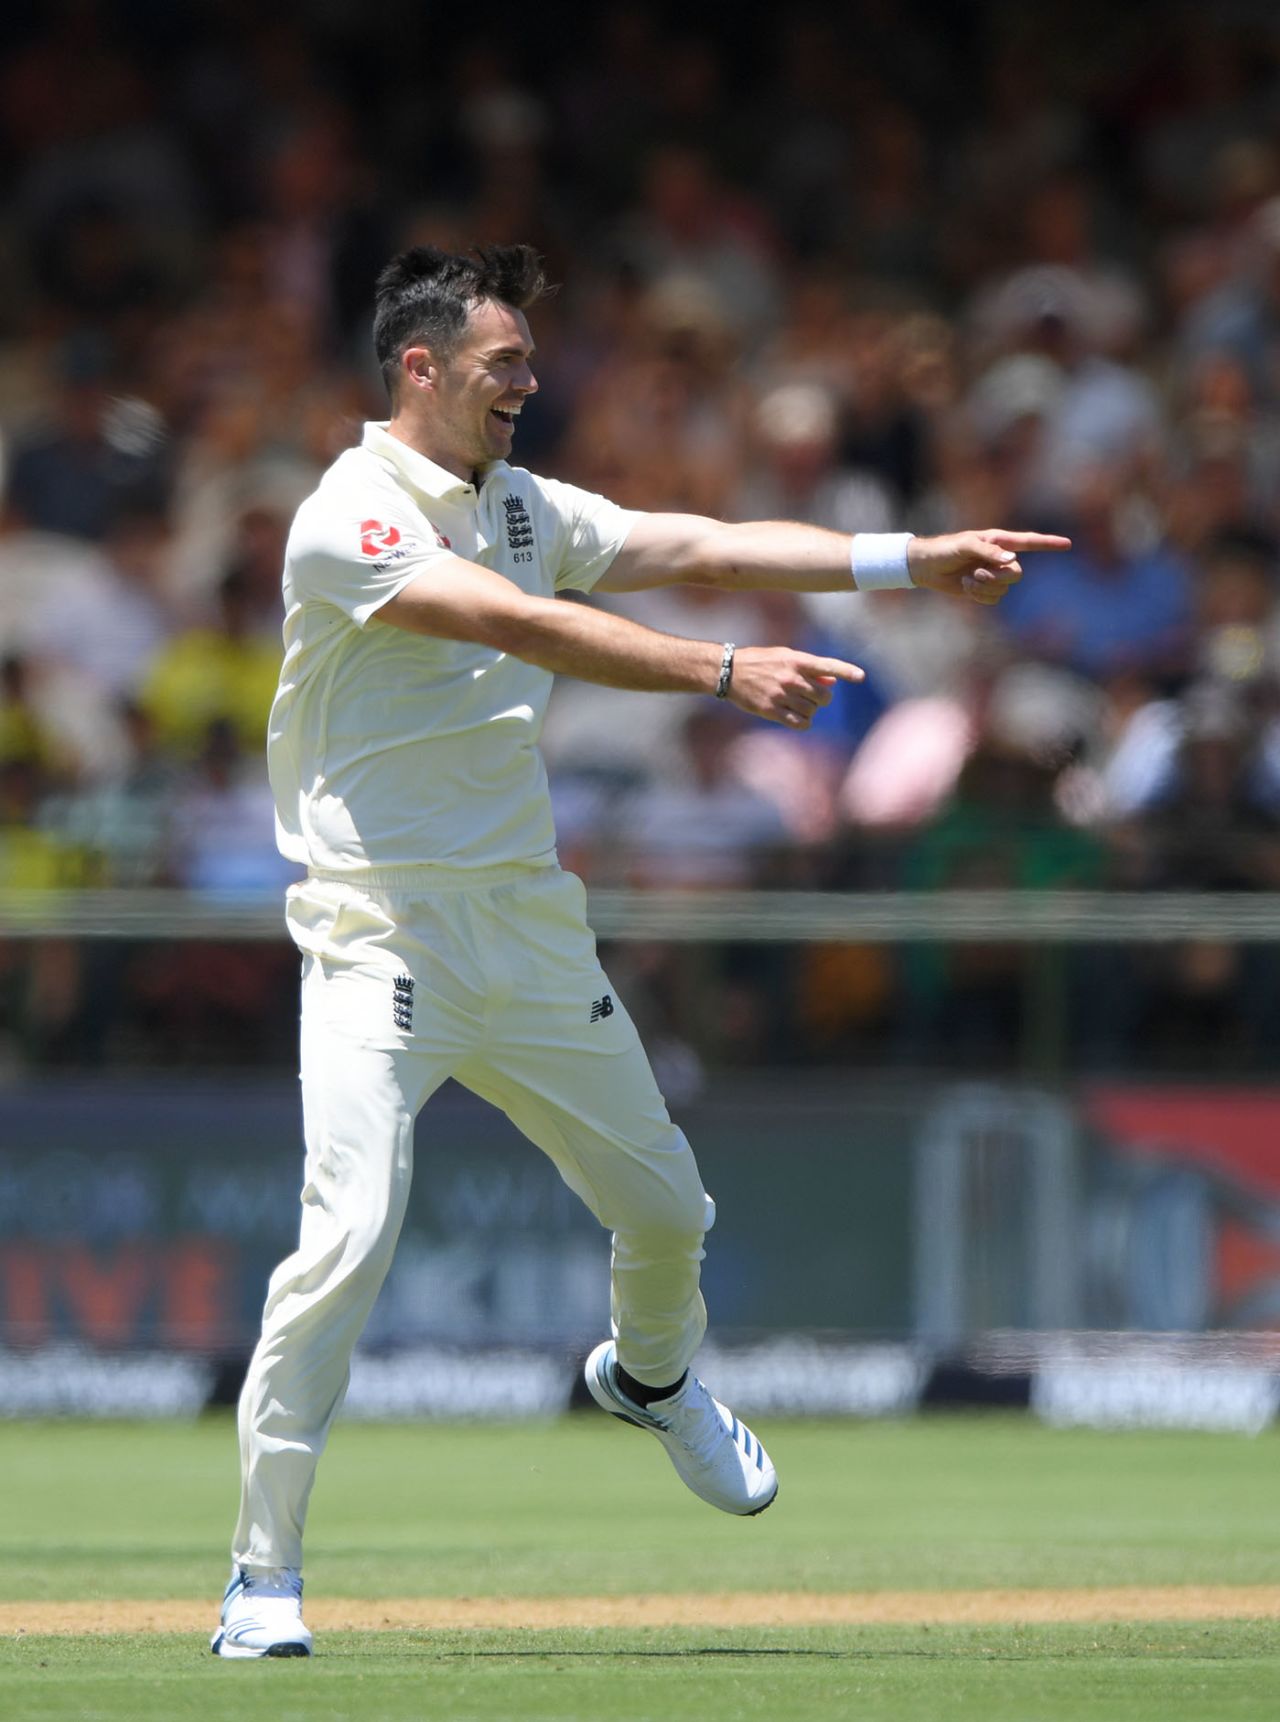 James Anderson was delighted with the wicket of Faf du Plessis, South Africa v England, 2nd Test, Cape Town, 2nd day, January 4, 2020